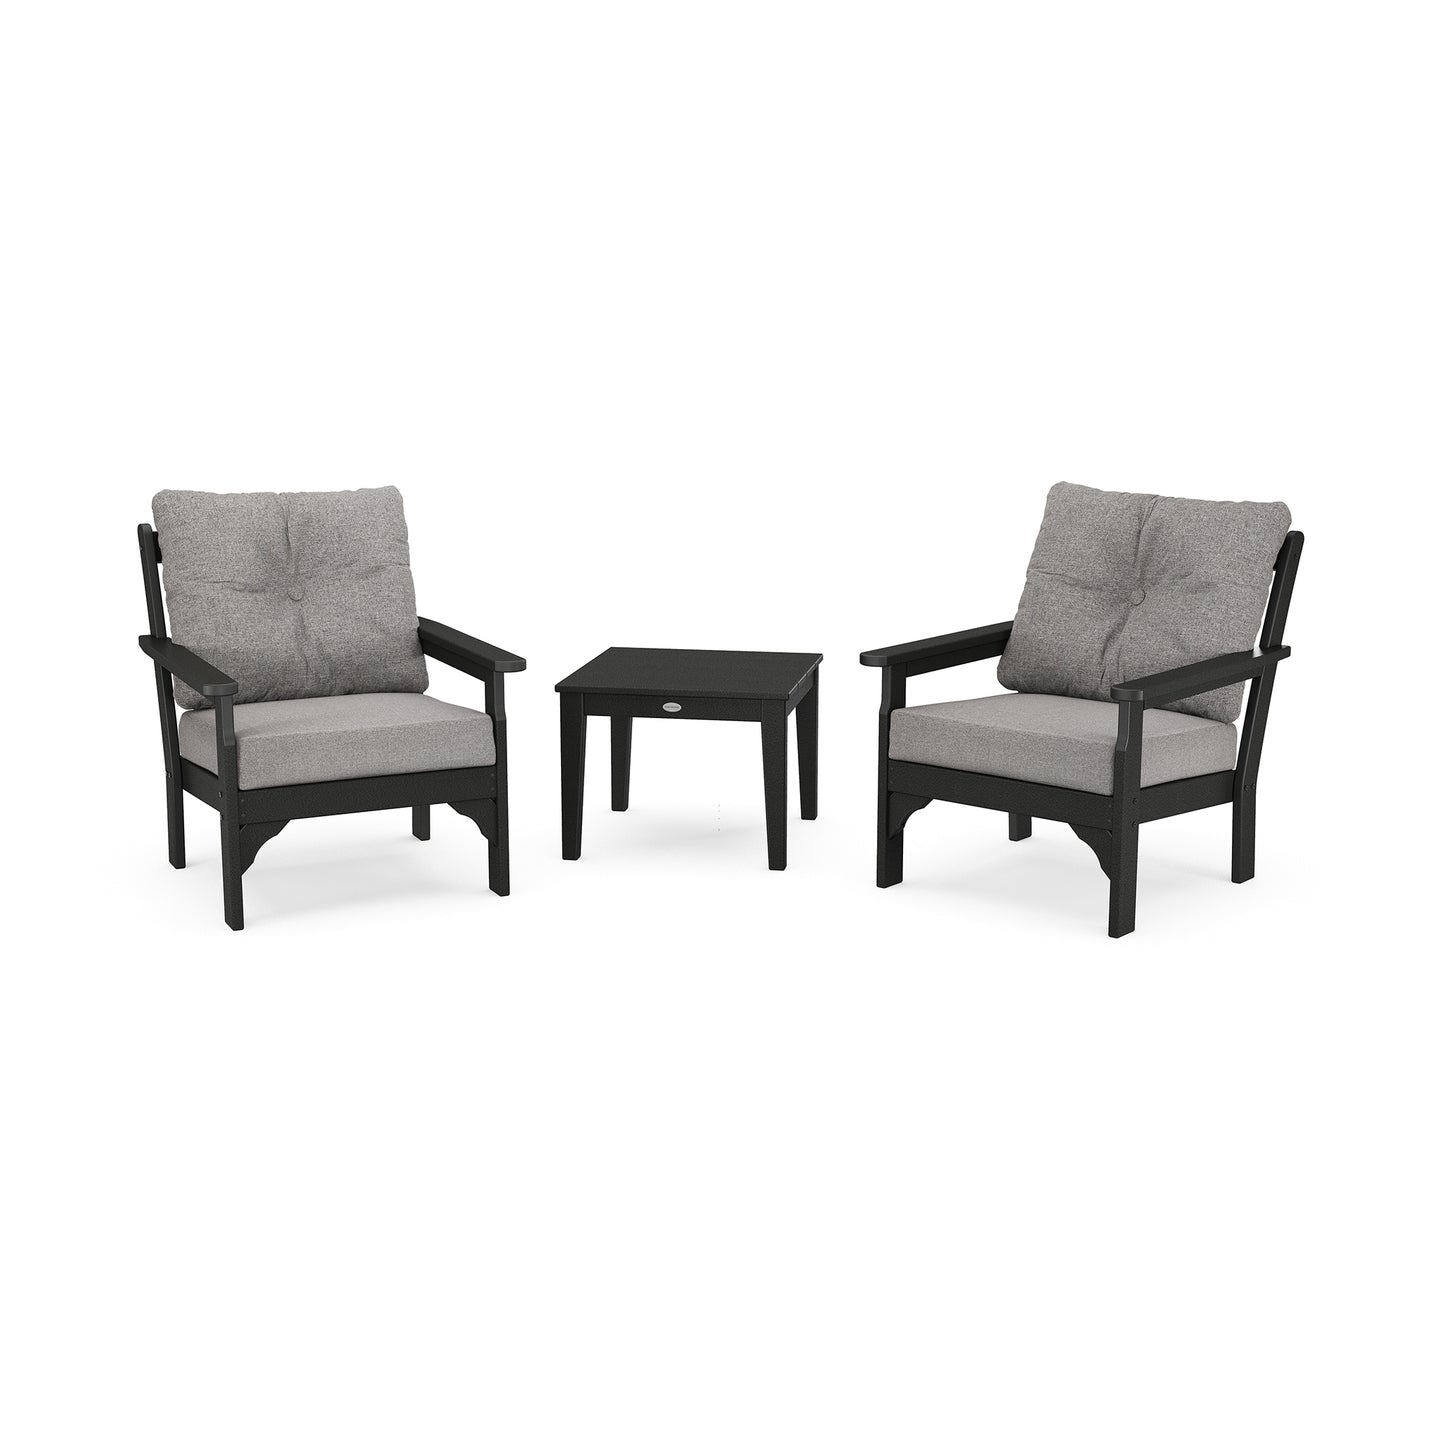 Two POLYWOOD Vineyard 3-Piece Deep Seating Sets with deep seating cushions and a matching side table, set against a plain white background.